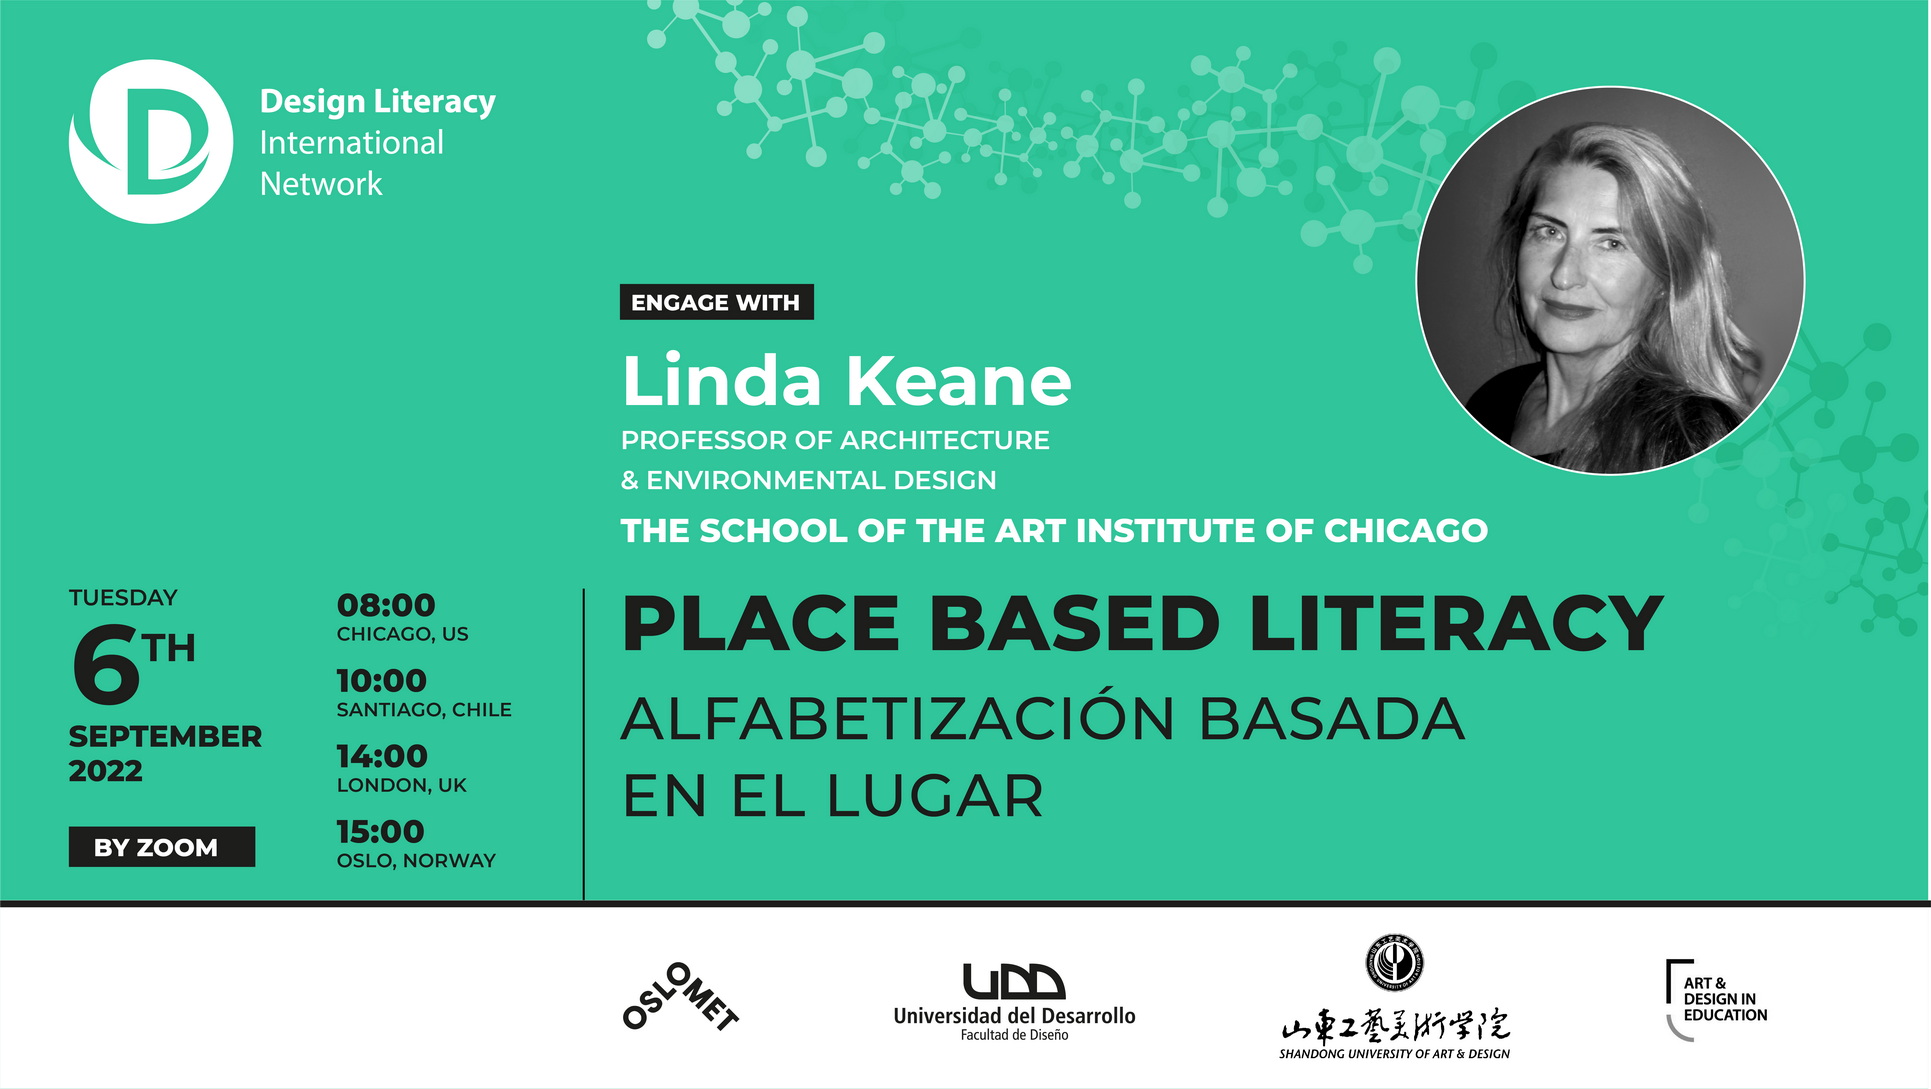 Engage with Linda Keane | Place Based Literacy | Design Literacy International Network event